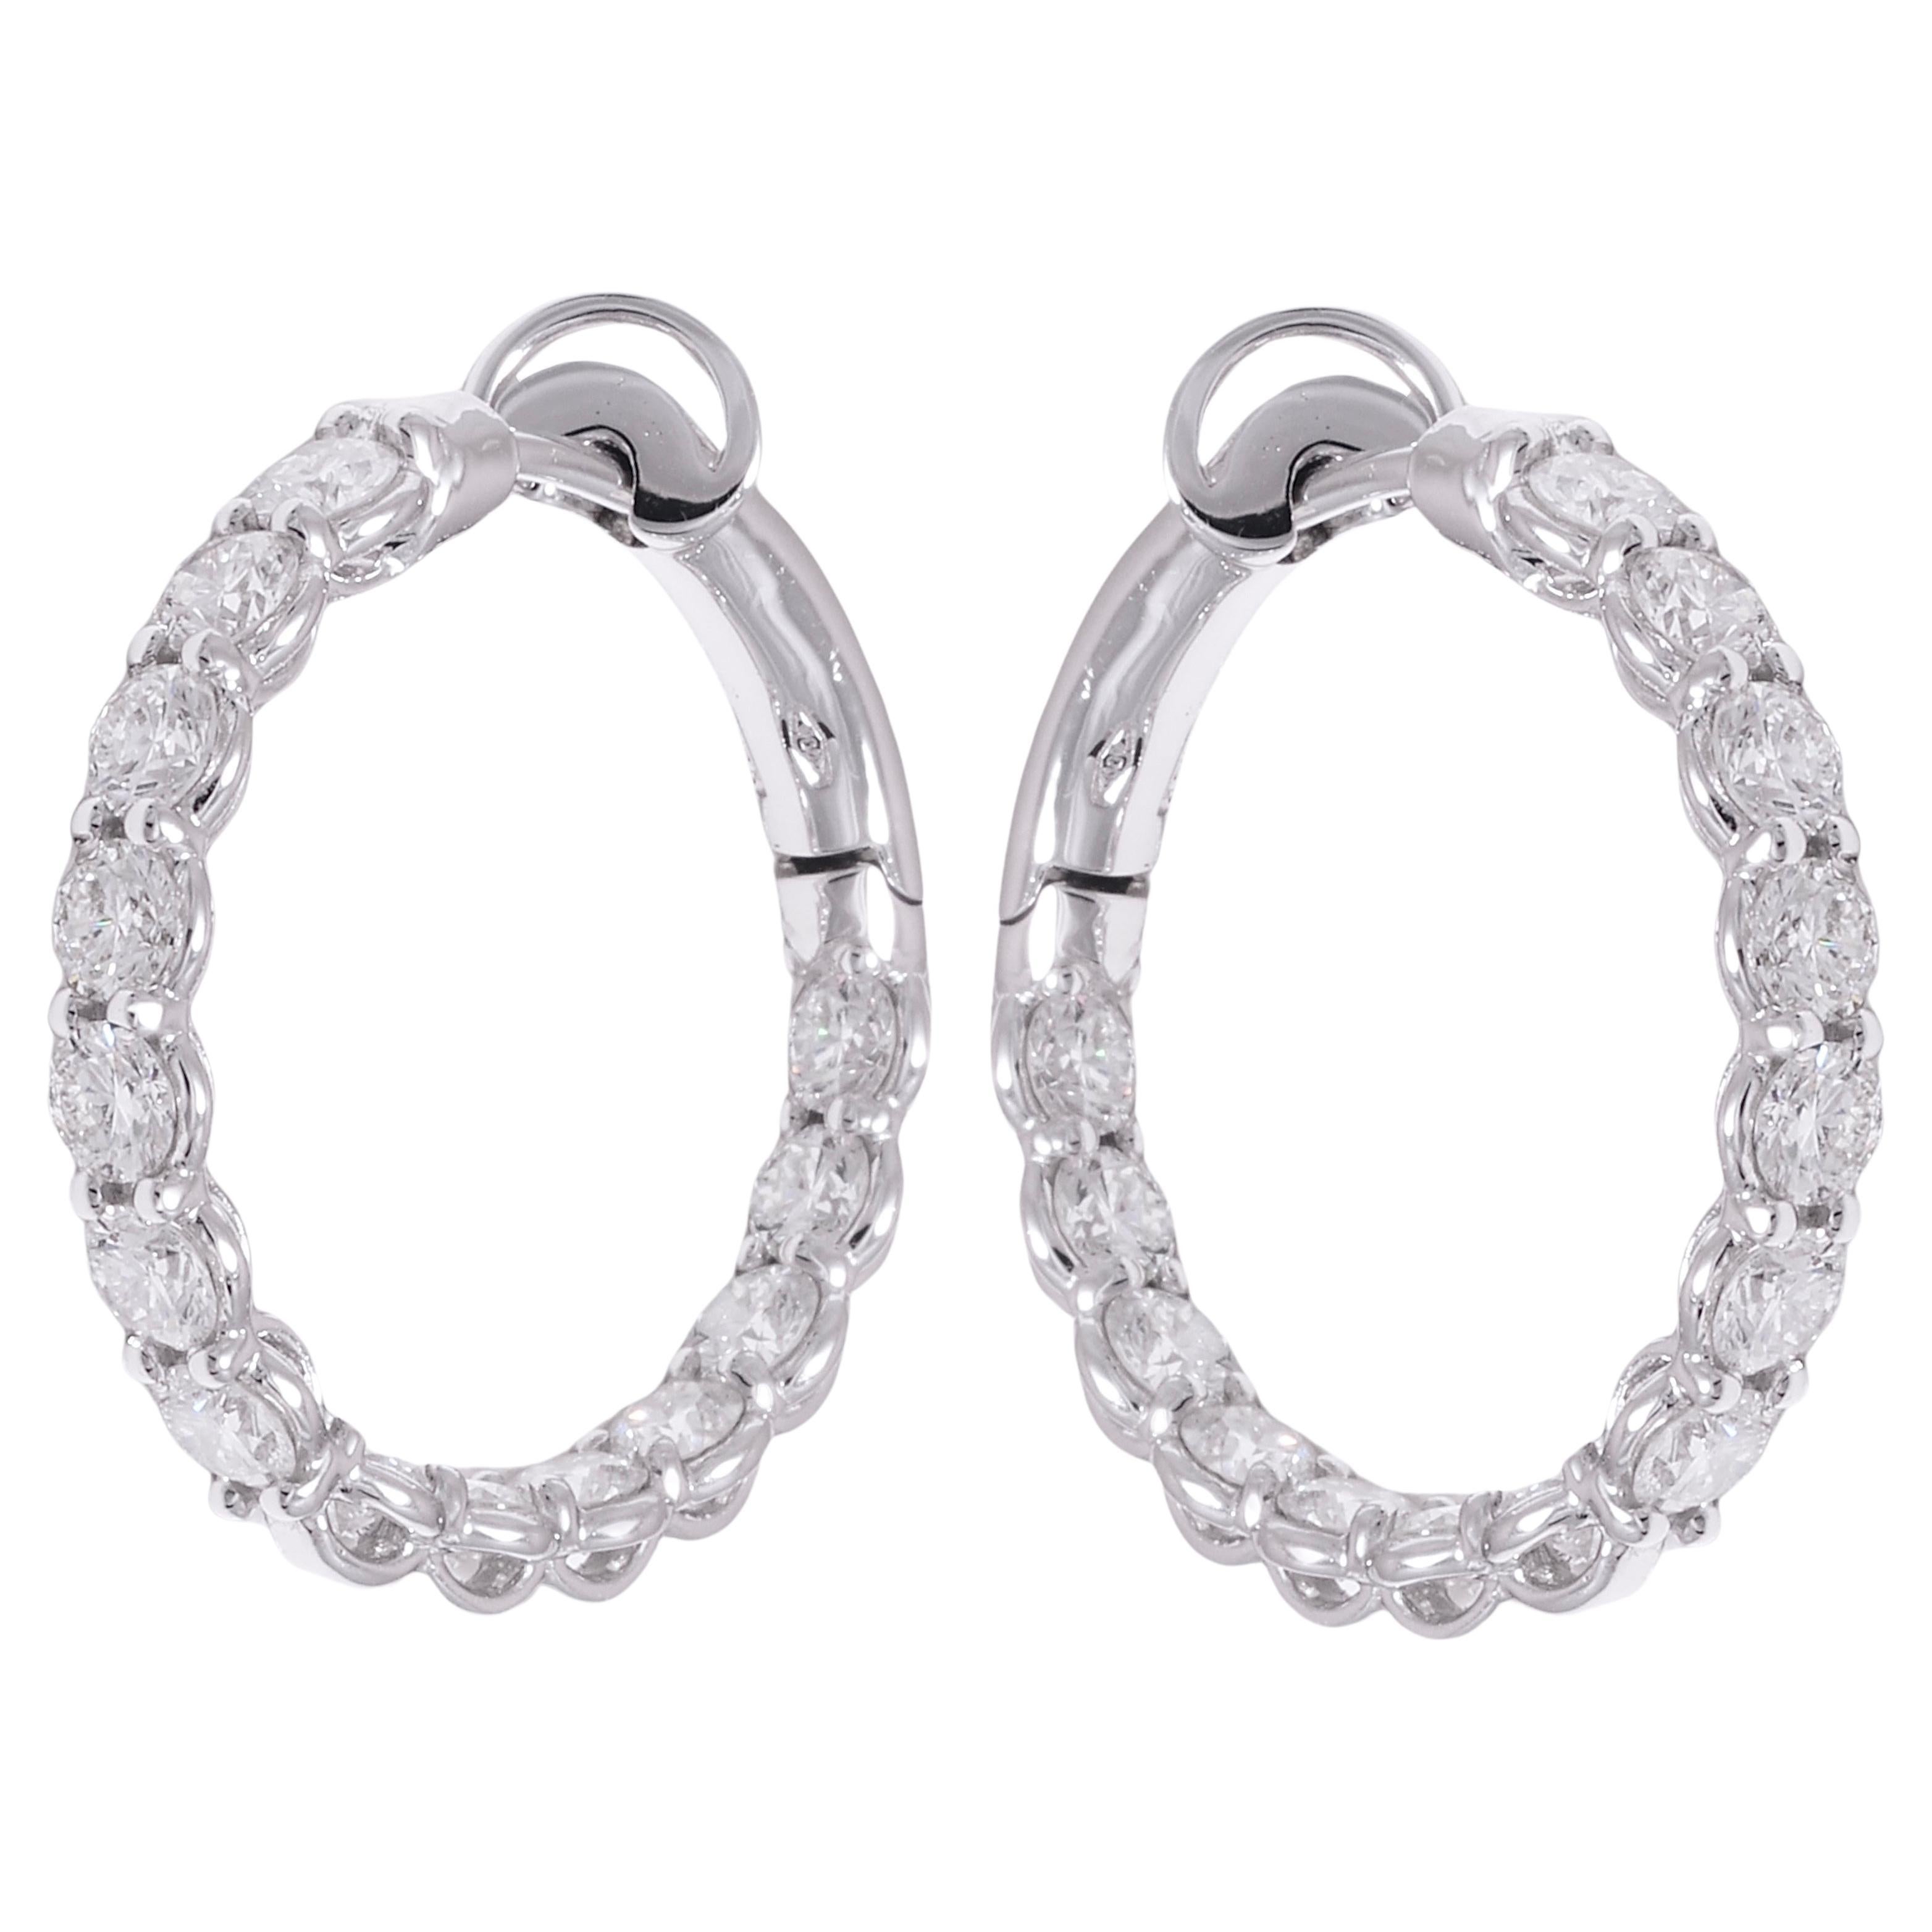 Gorgeous 18 kt. White Gold Loop Earrings With 3.14 ct. Diamonds 

Diamonds: brilliant cut diamond, together approx. 3.14 ct. G Vs

Material: 18 kt. white gold

Measurements: Diameter earring 24 mm

Total weight: 8 grams / 5.2 dwt / 0.285